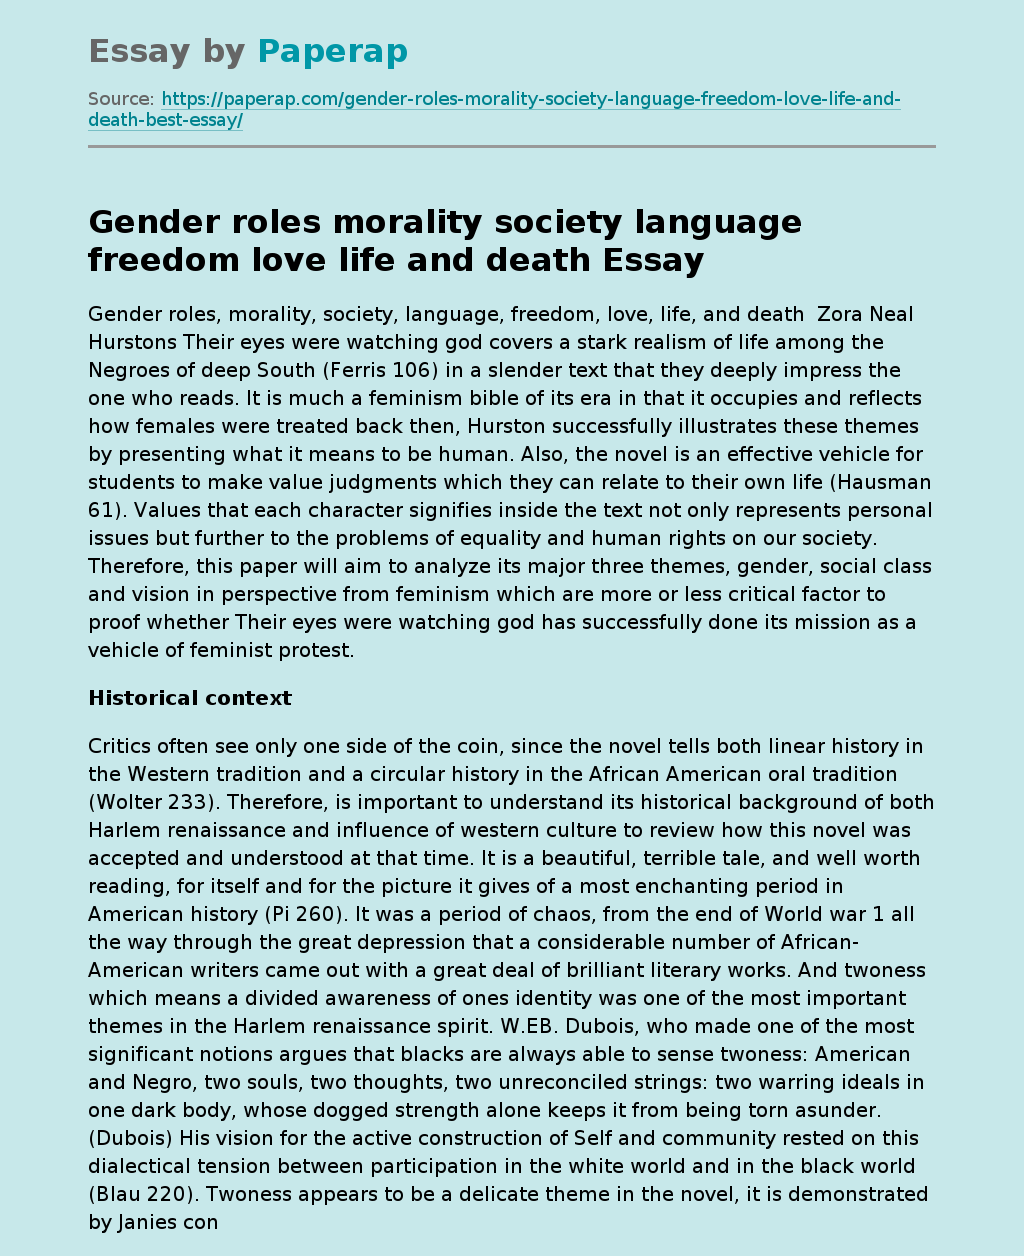 Gender roles morality society language freedom love life and death